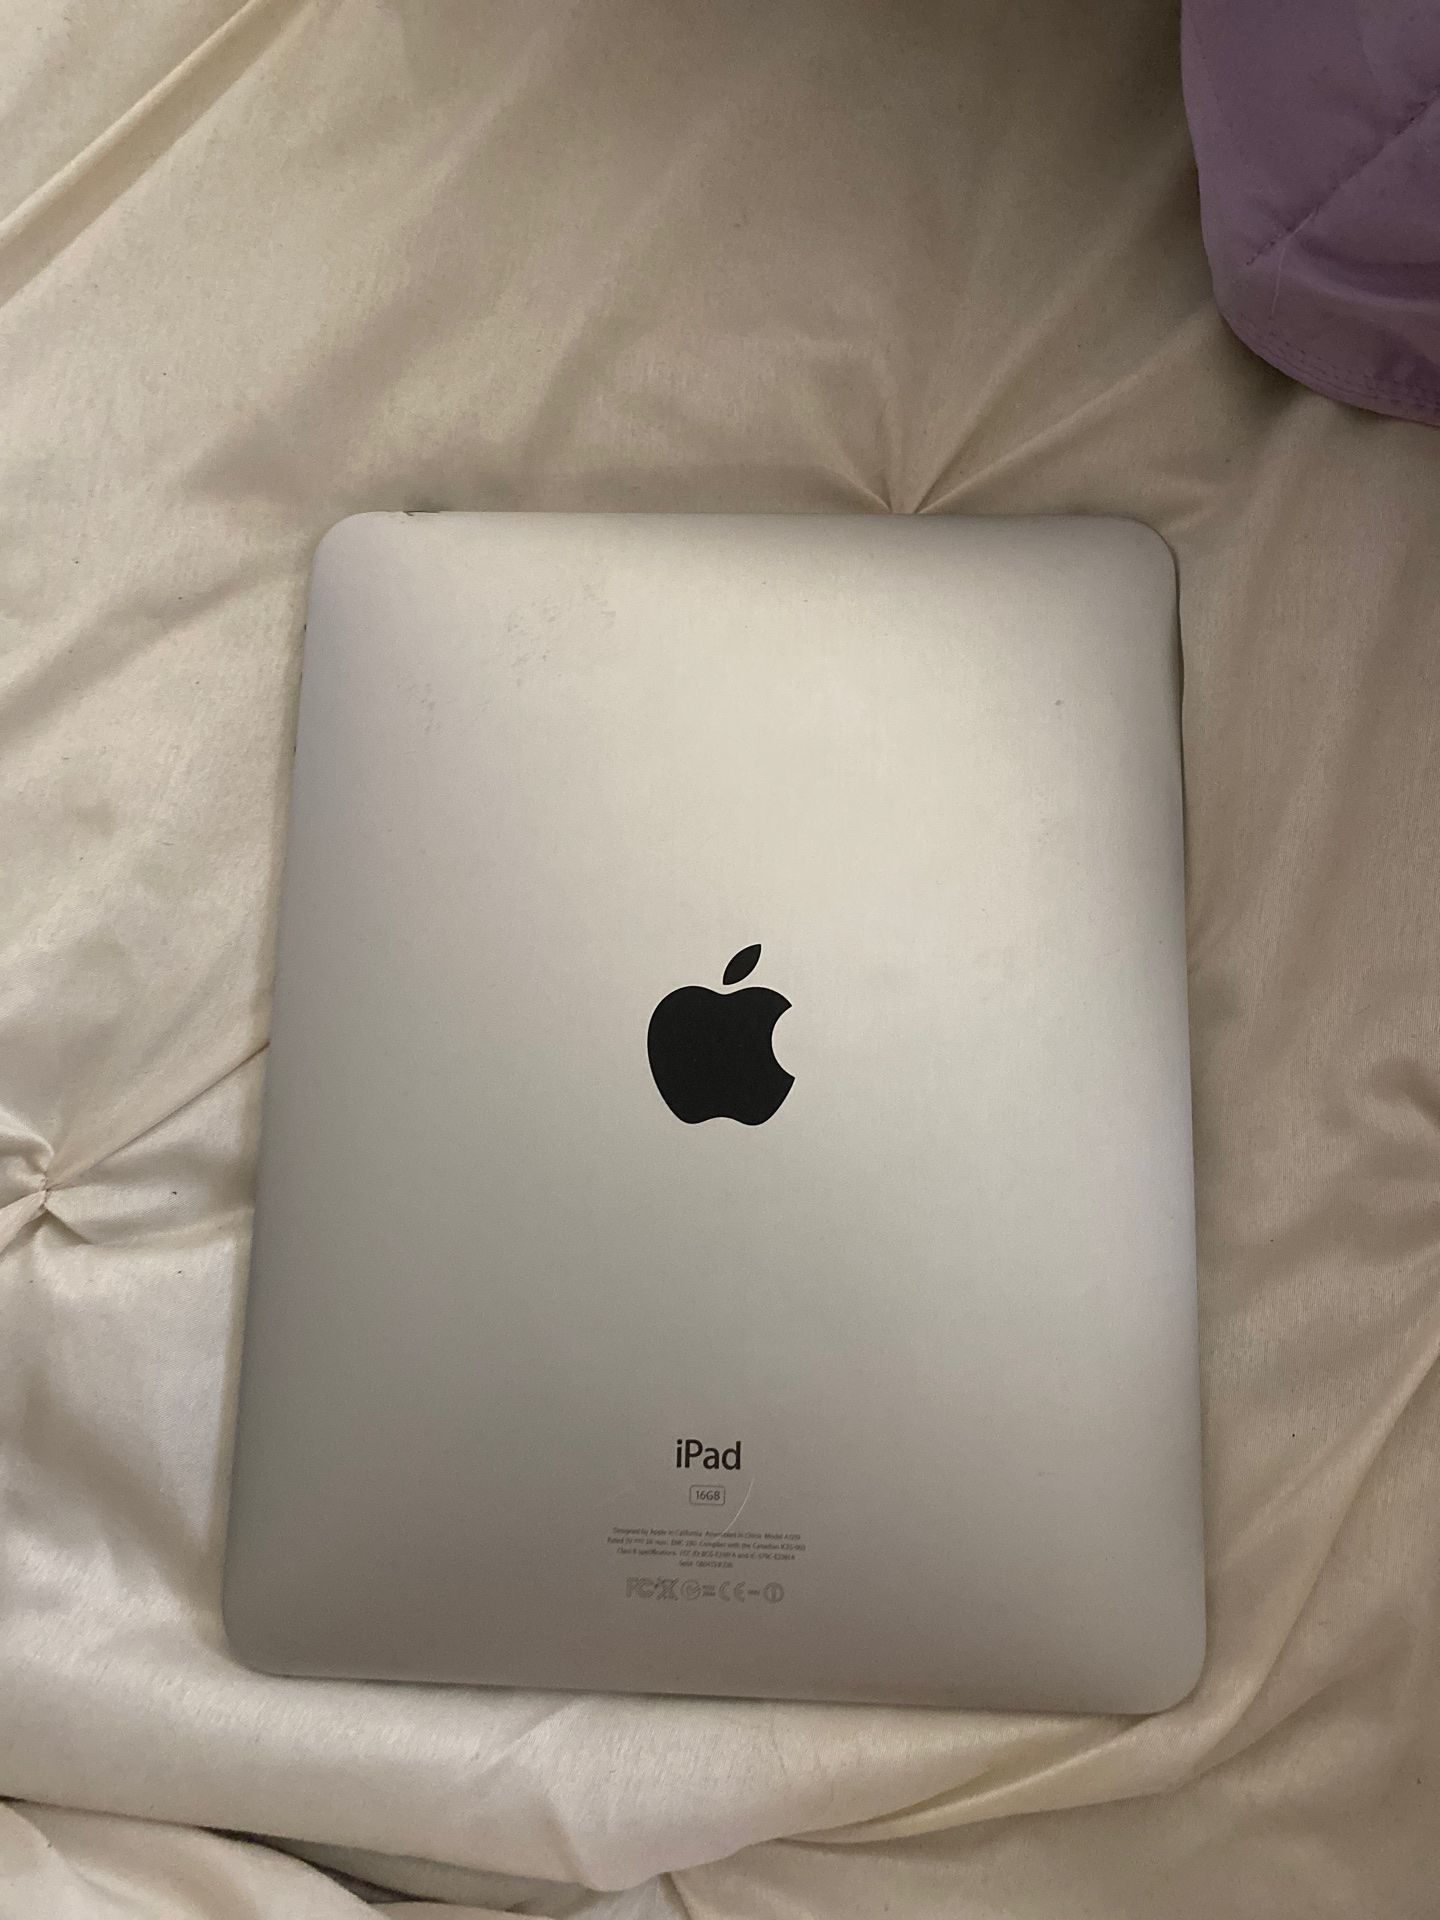 Ipad 1 first generation (16g) great condition